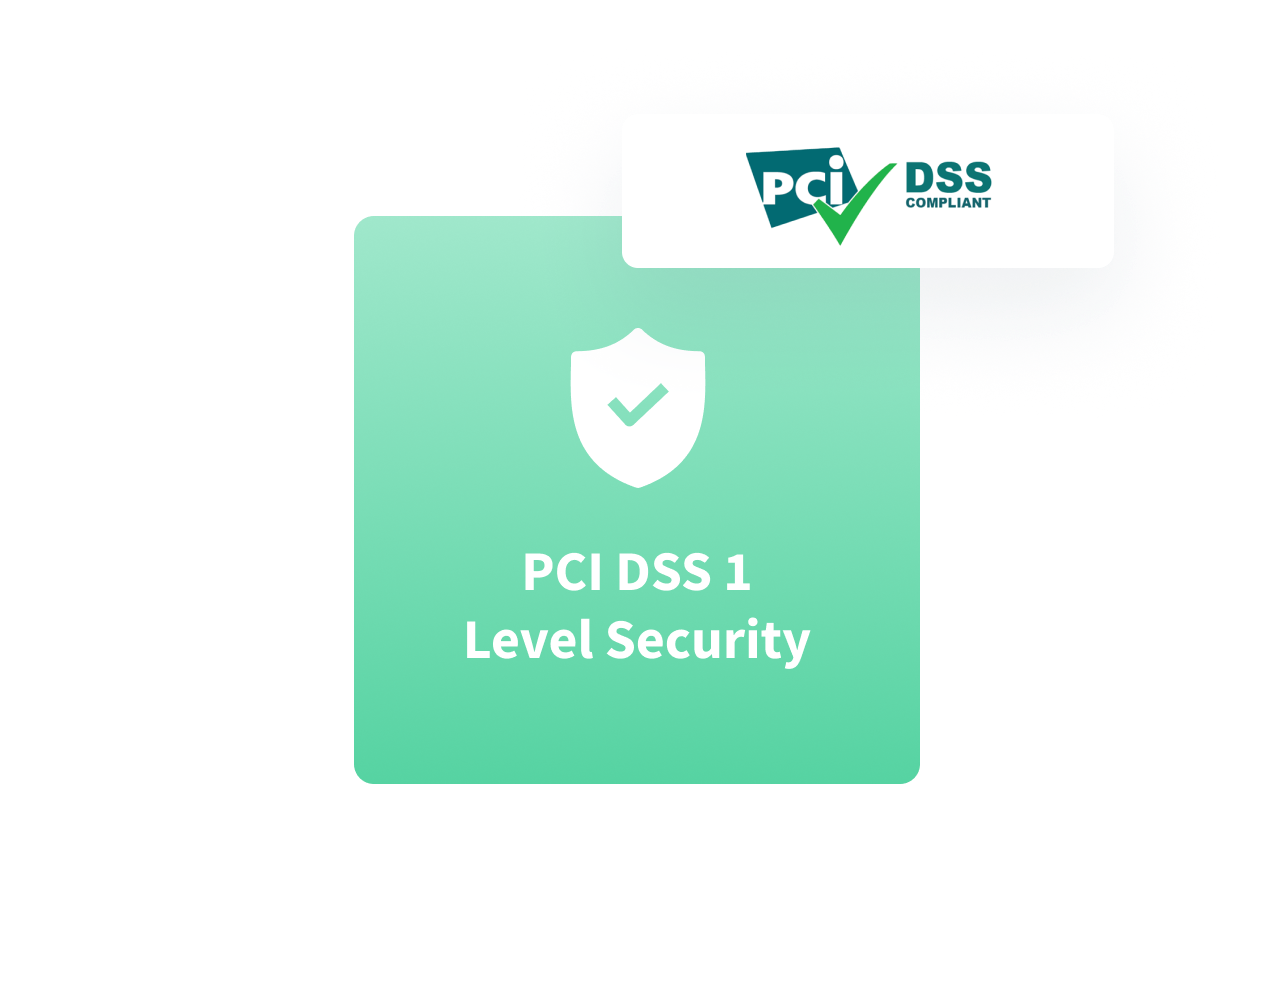 PCI DSS 1 Level Security